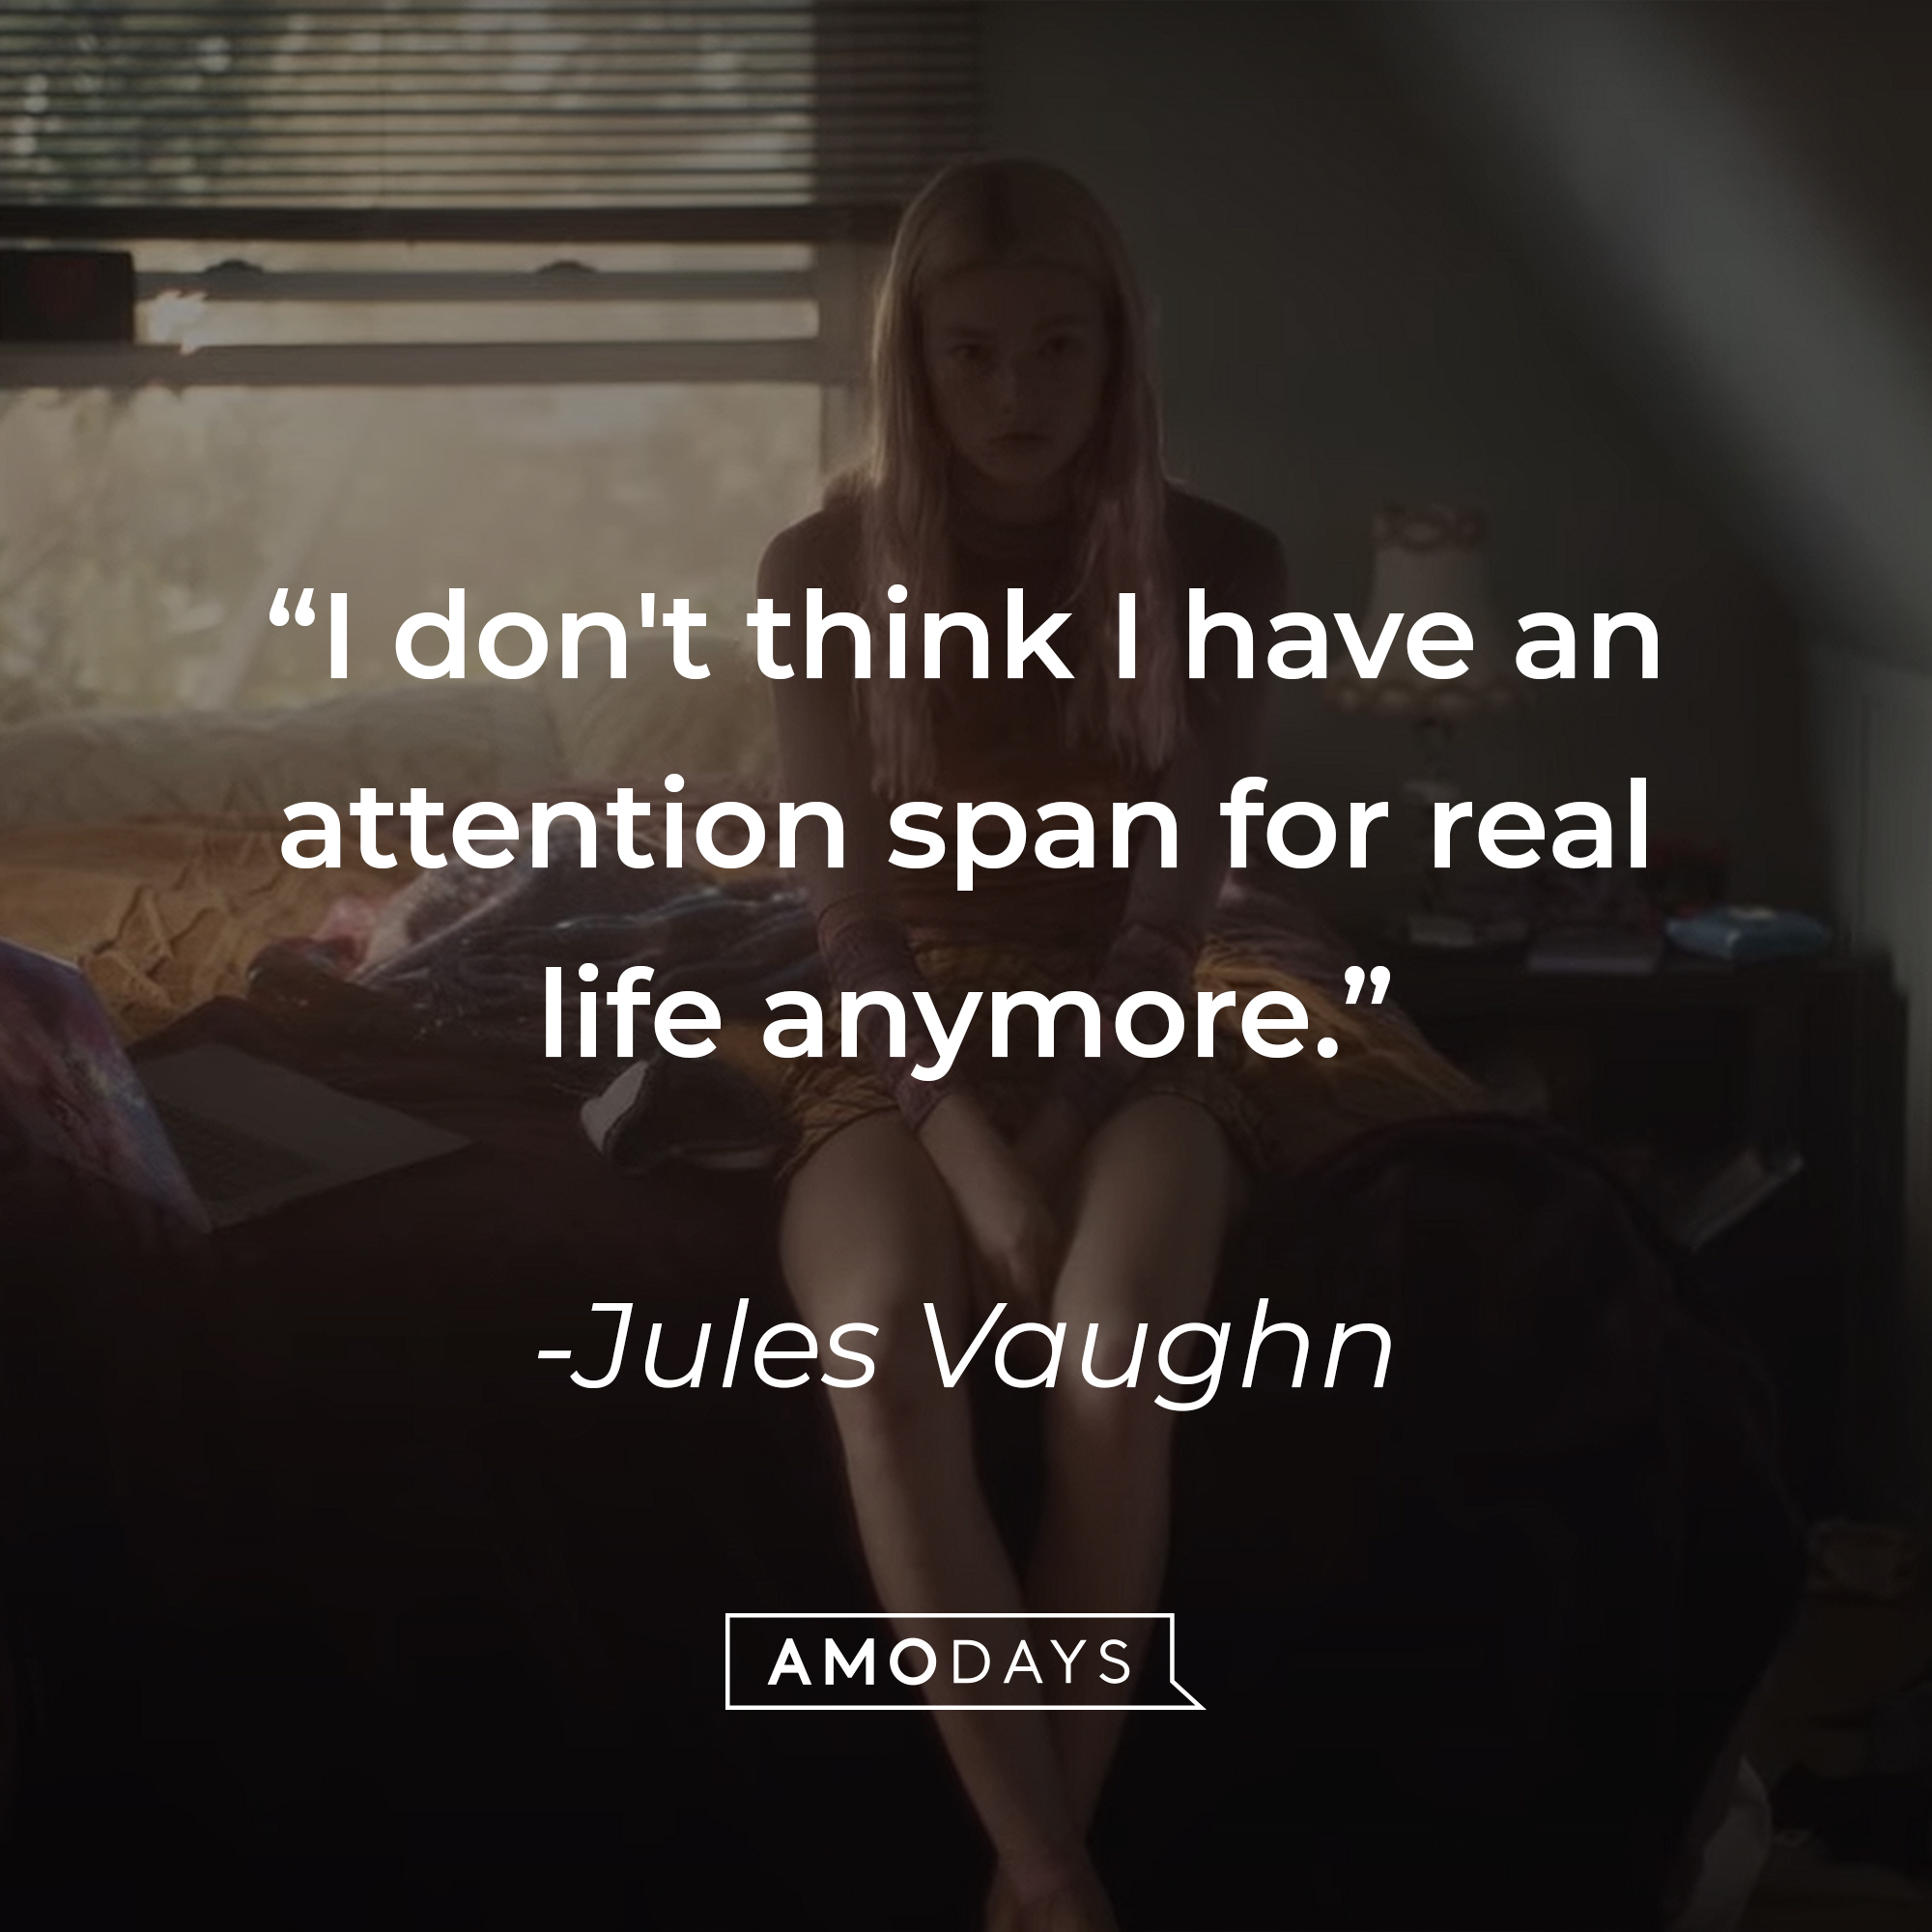 Jules Vaughn with her quote: "I don't think I have an attention span for real life anymore." | Source: HBO